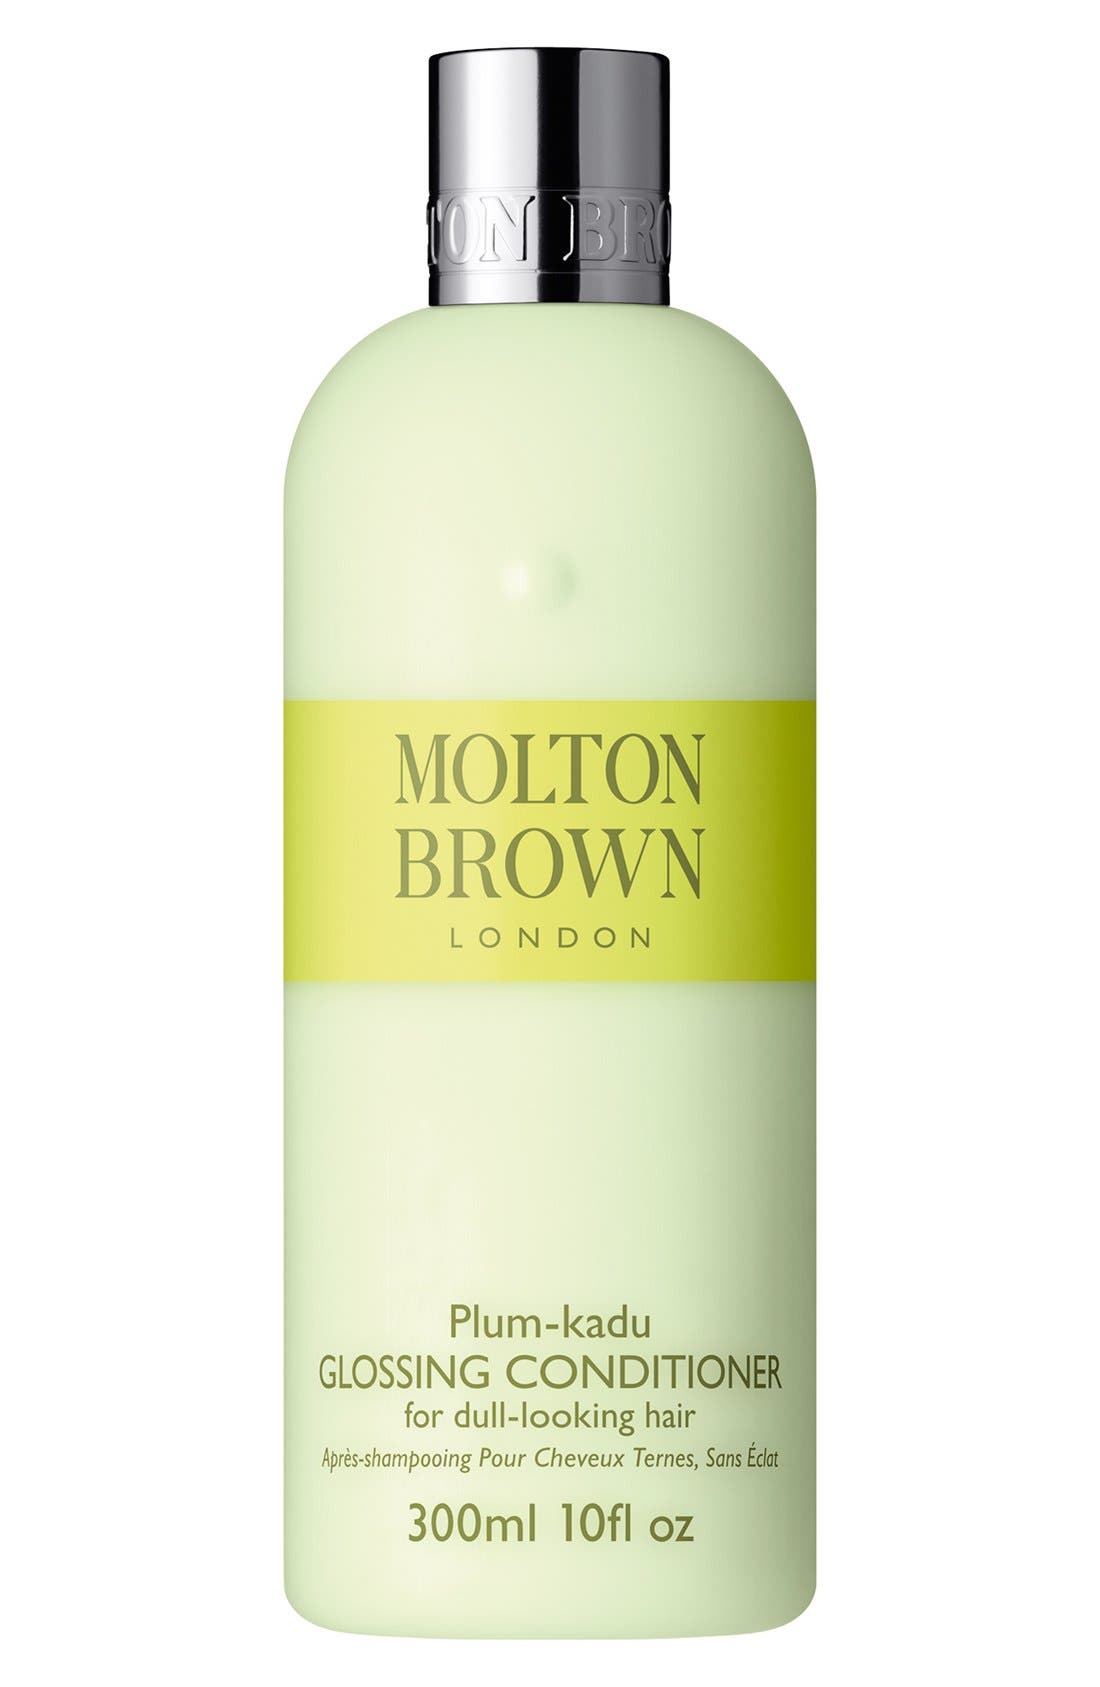 Molton Brown Glossing Conditioner With Plum-kadu